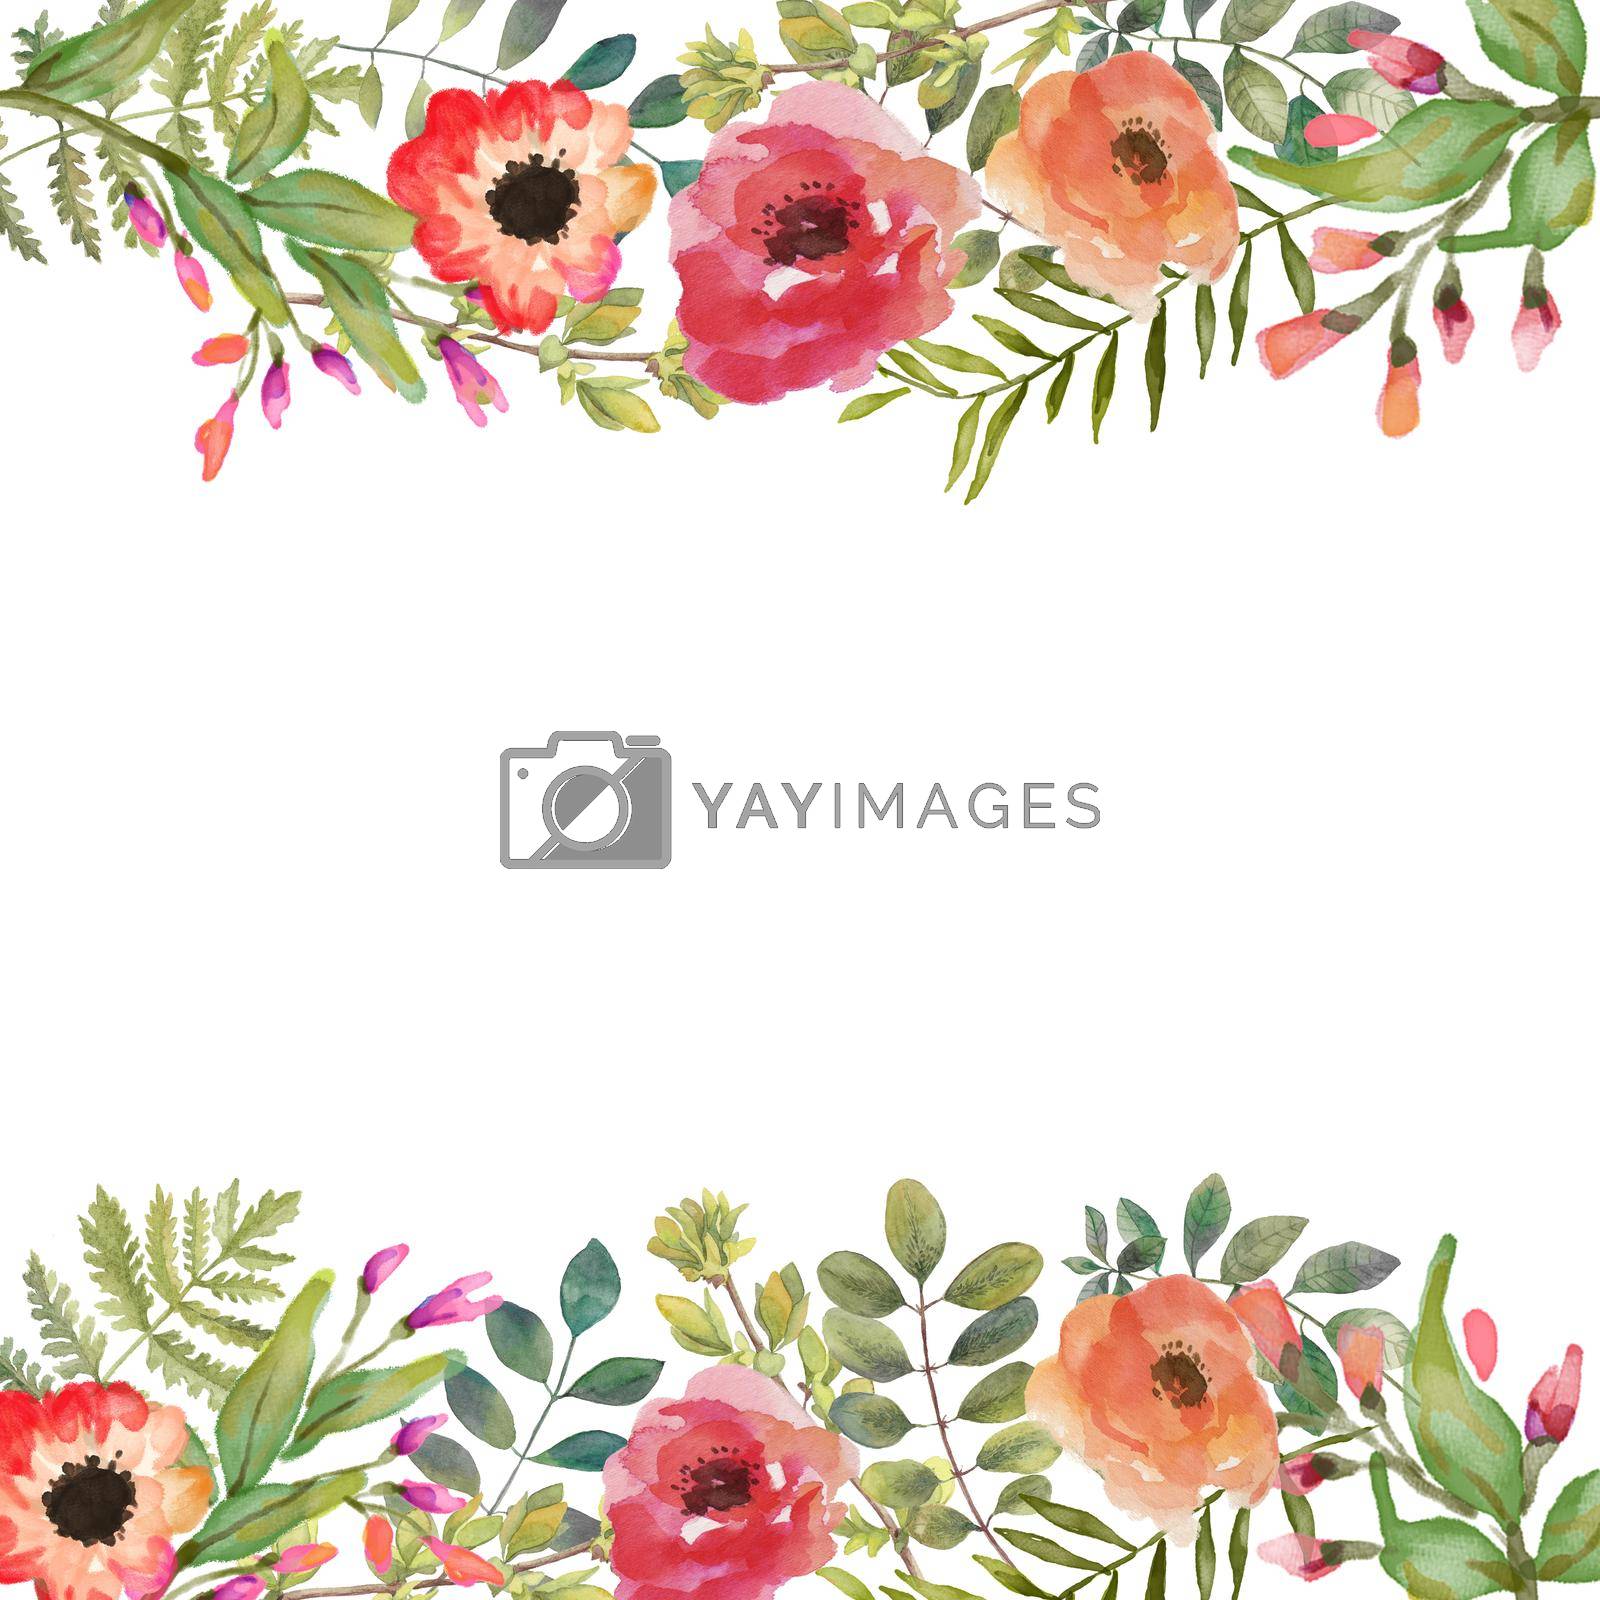 Royalty free image of watercolor flower frame backgrounds. Wedding ornament concept. Flower poster, invitation. decorative greeting card or invitation design background by ANITA